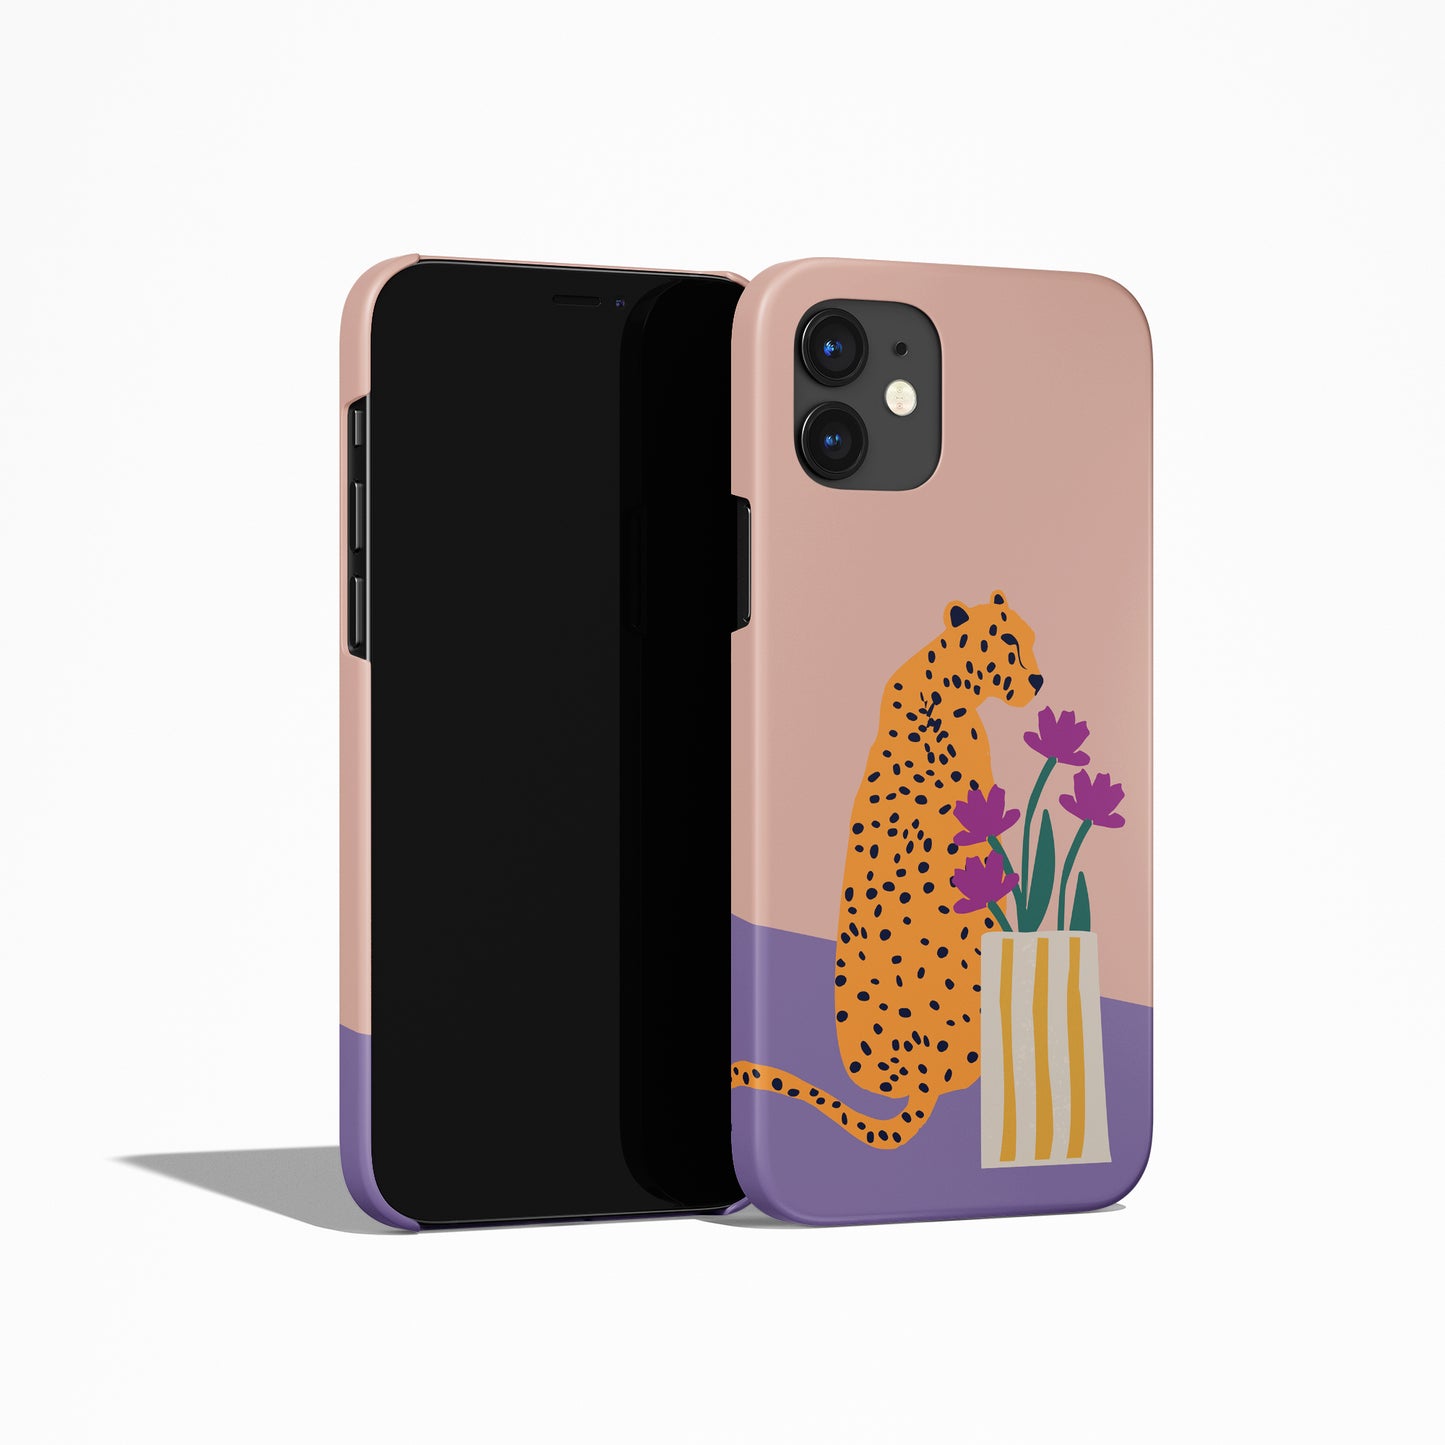 Leopard and Flower Illustration iPhone Case